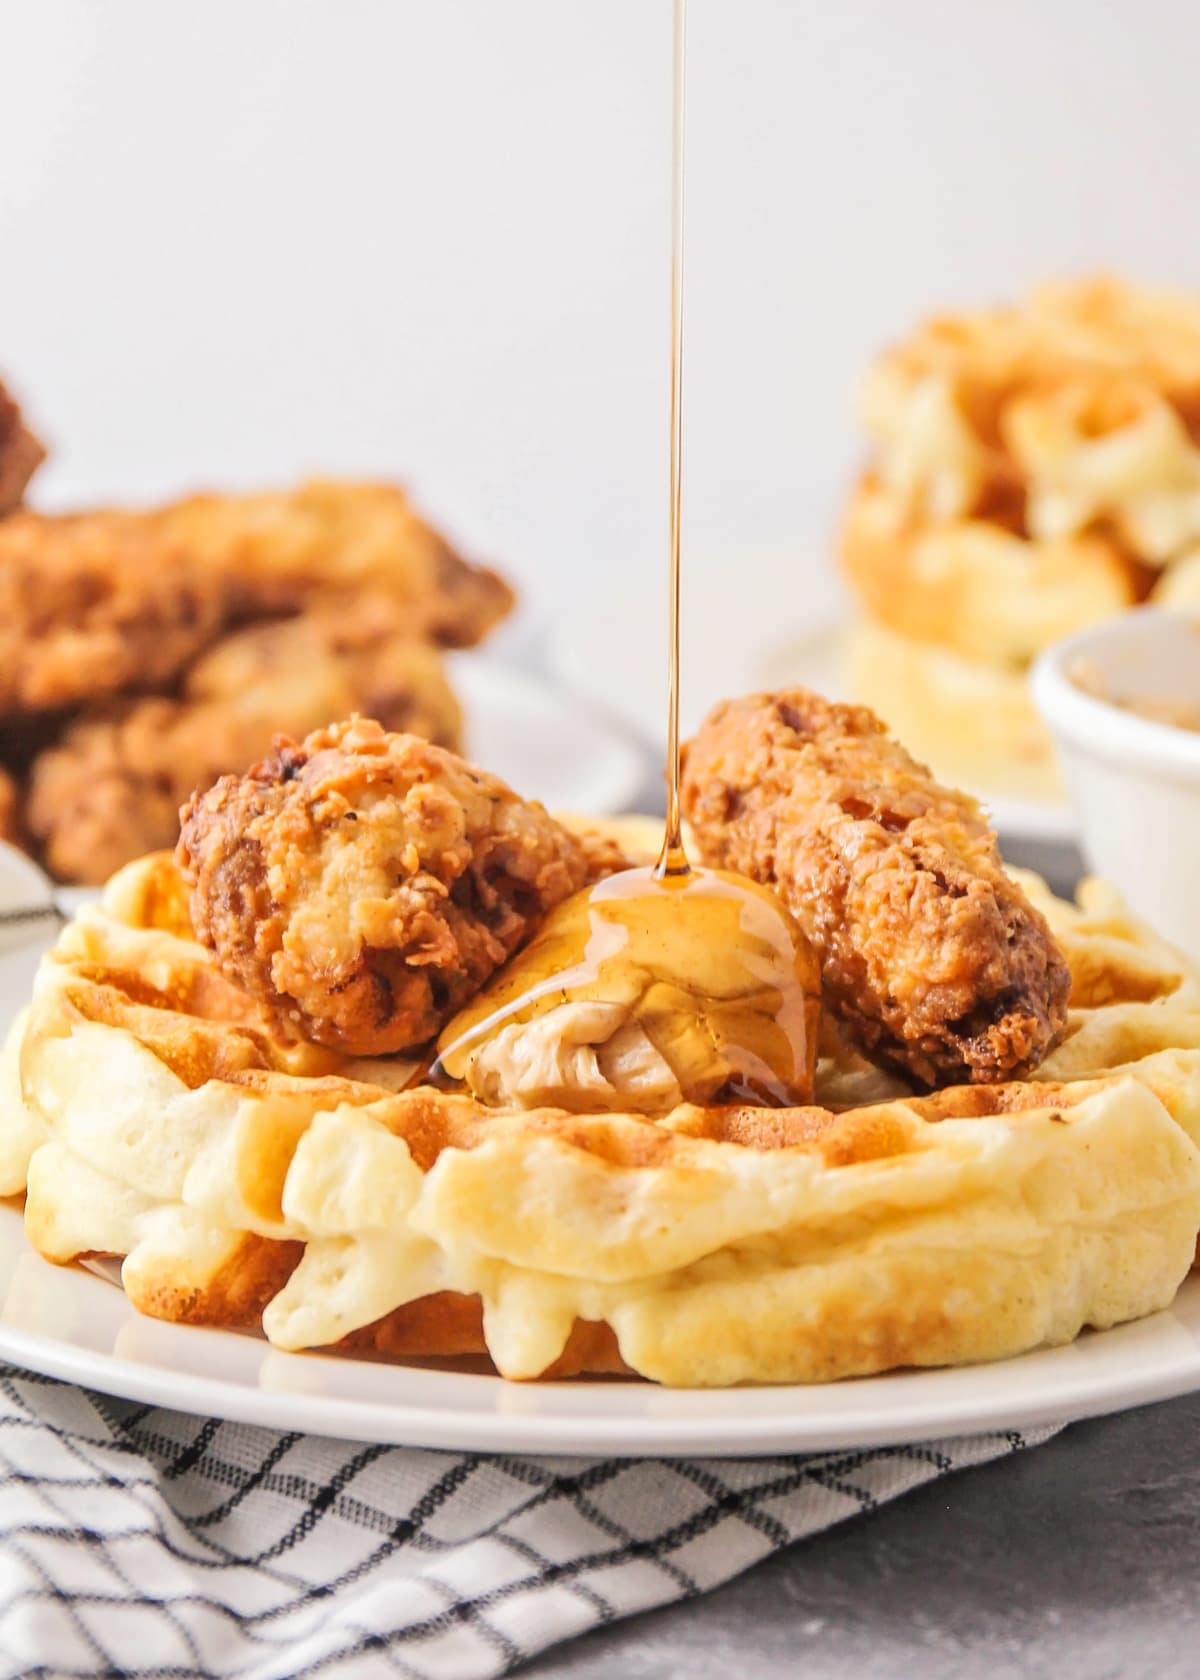 Syrup drizzled on a plate of chicken and waffles.